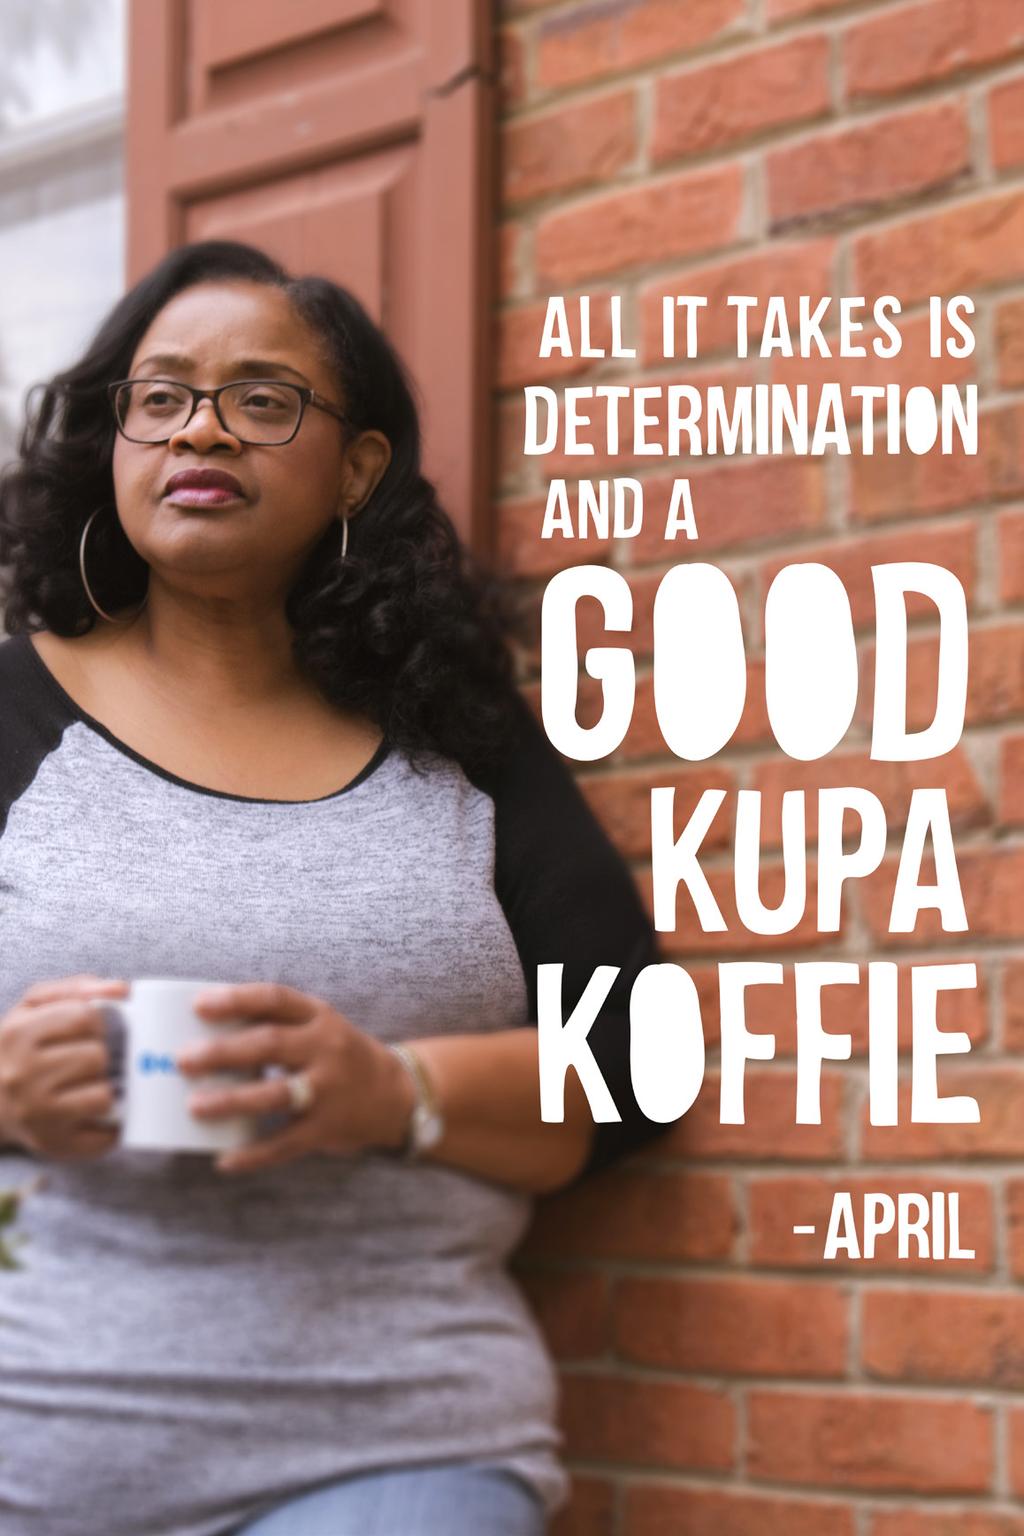 ADVERTISING THE GOOD KUPA KOFFIE ADVERTISING CAMPAIGN FOCUSES ON